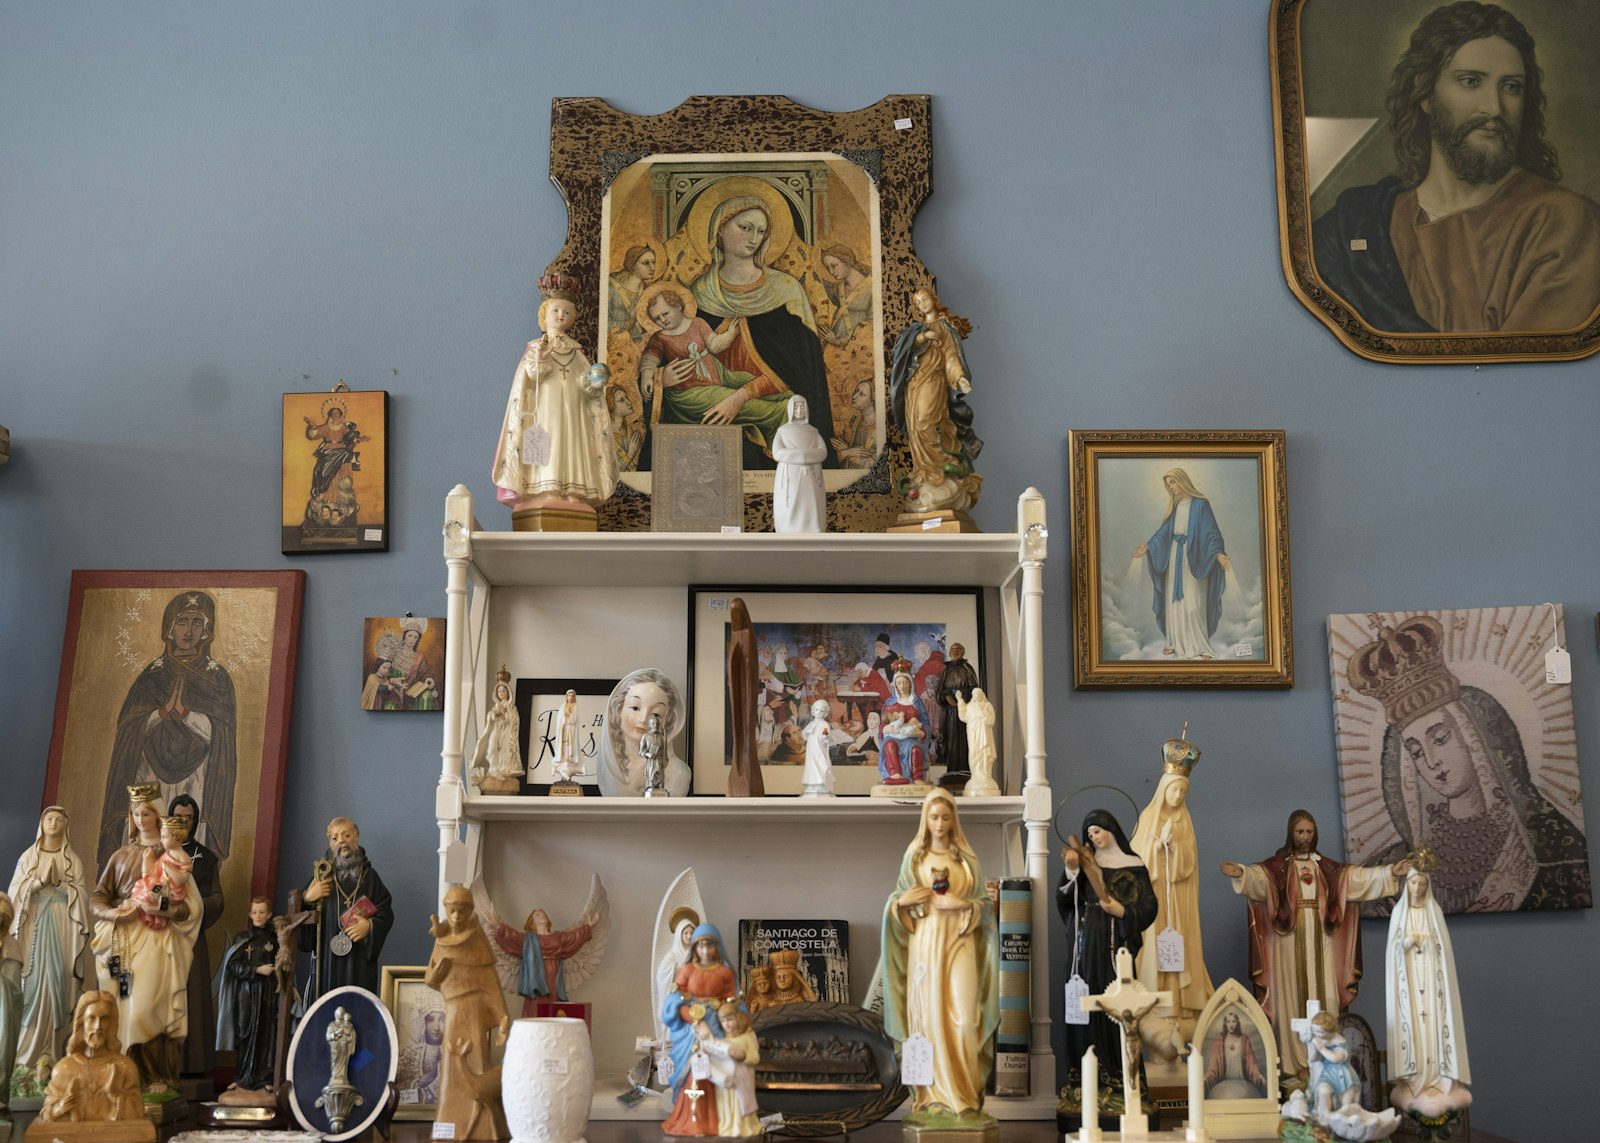 The beautifully curated, expansive store is a treasure trove of religious statues, paintings, and books, as well as carefully picked secular items such as furniture, home decor and jewelry, that have all been donated by members of the surrounding community.